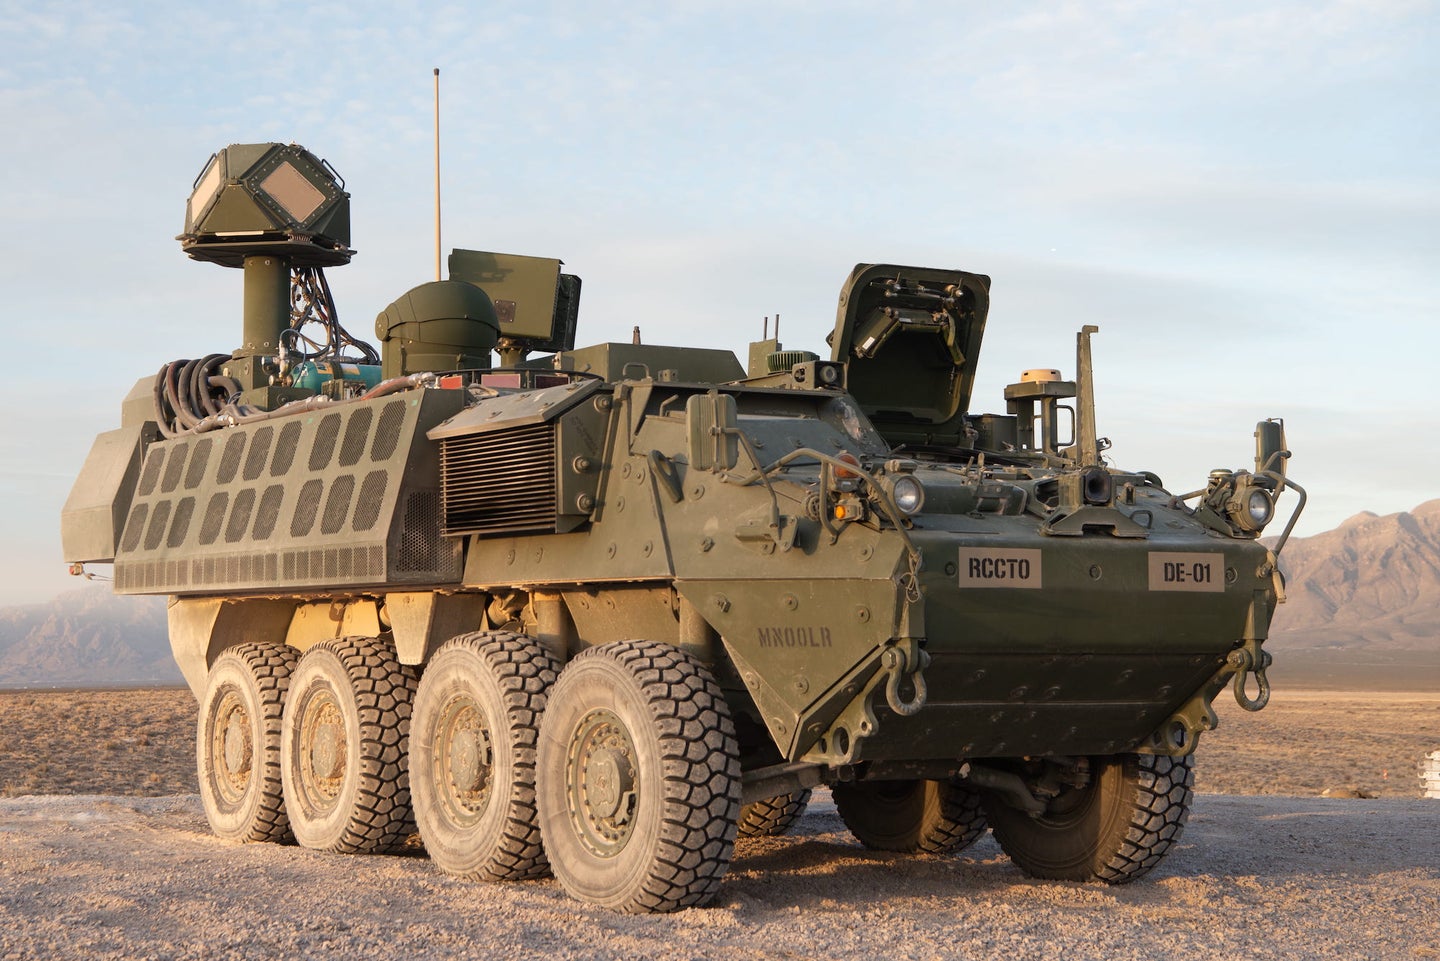 The laser on the Stryker combat vehicle.